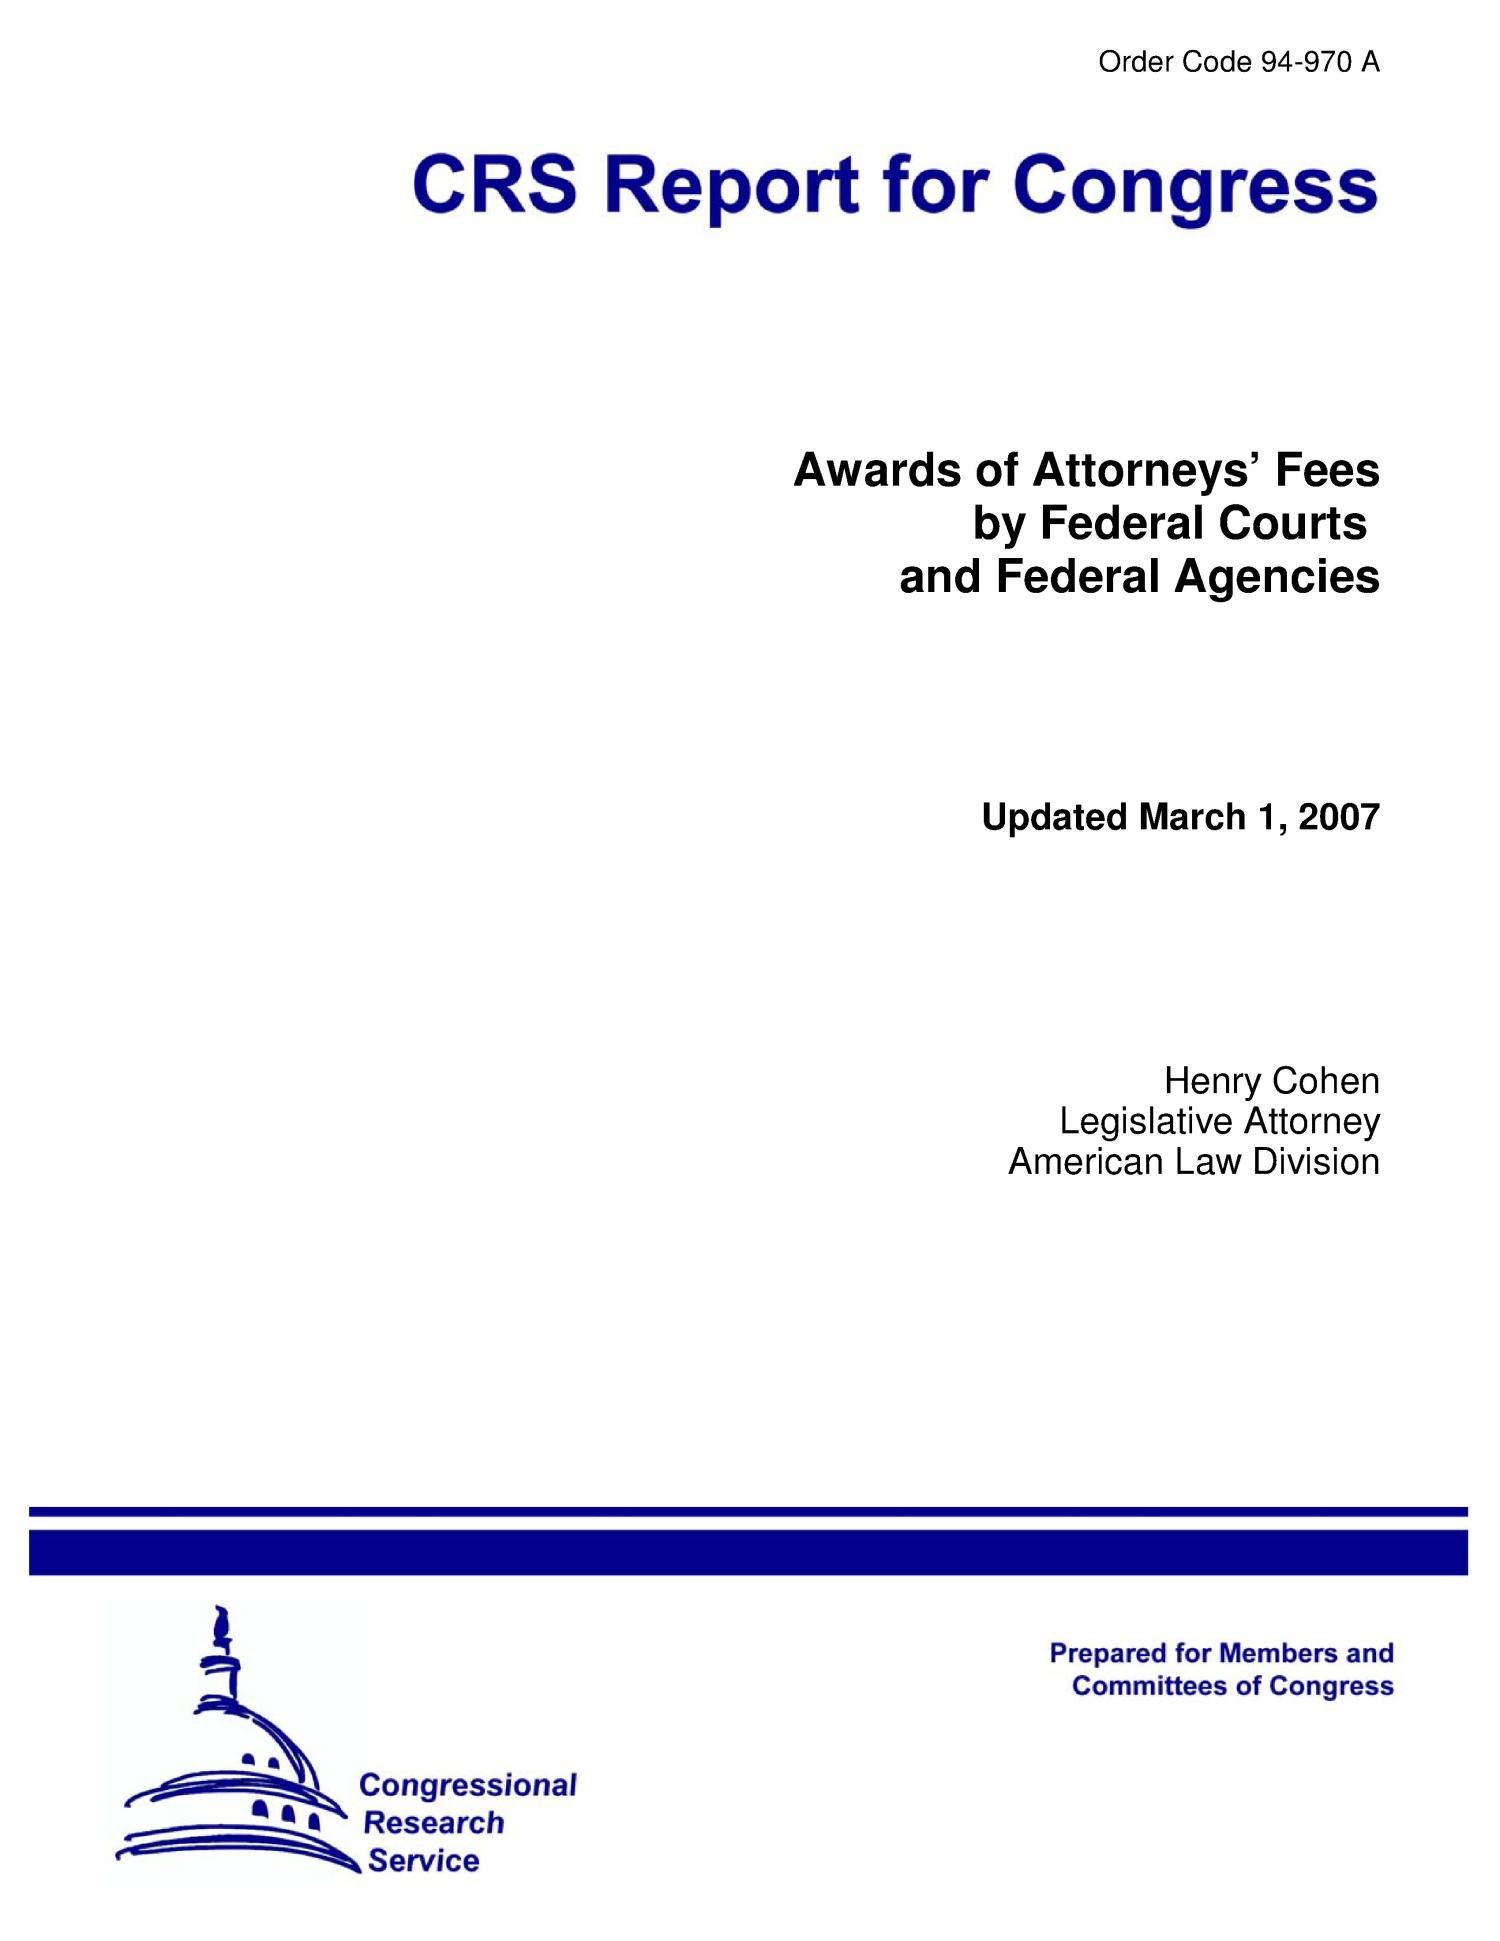 Awards of Attorneys’ Fees by Federal Courts and Federal Agencies
                                                
                                                    [Sequence #]: 1 of 123
                                                